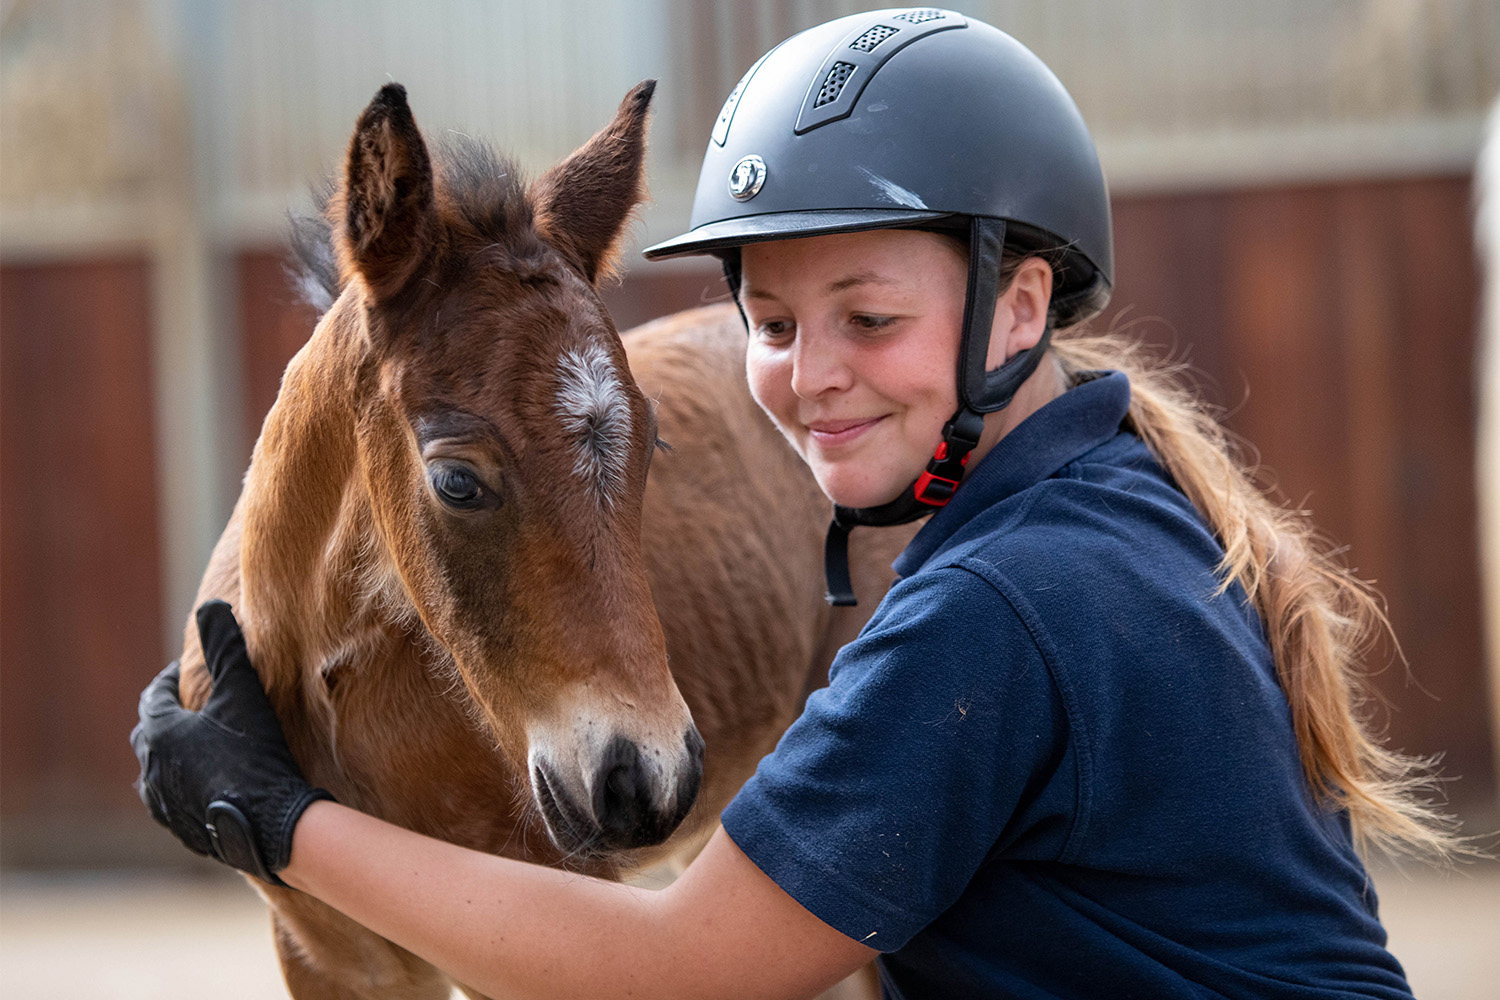 Uncovering the effect of cost of living crisis on those caring for horses